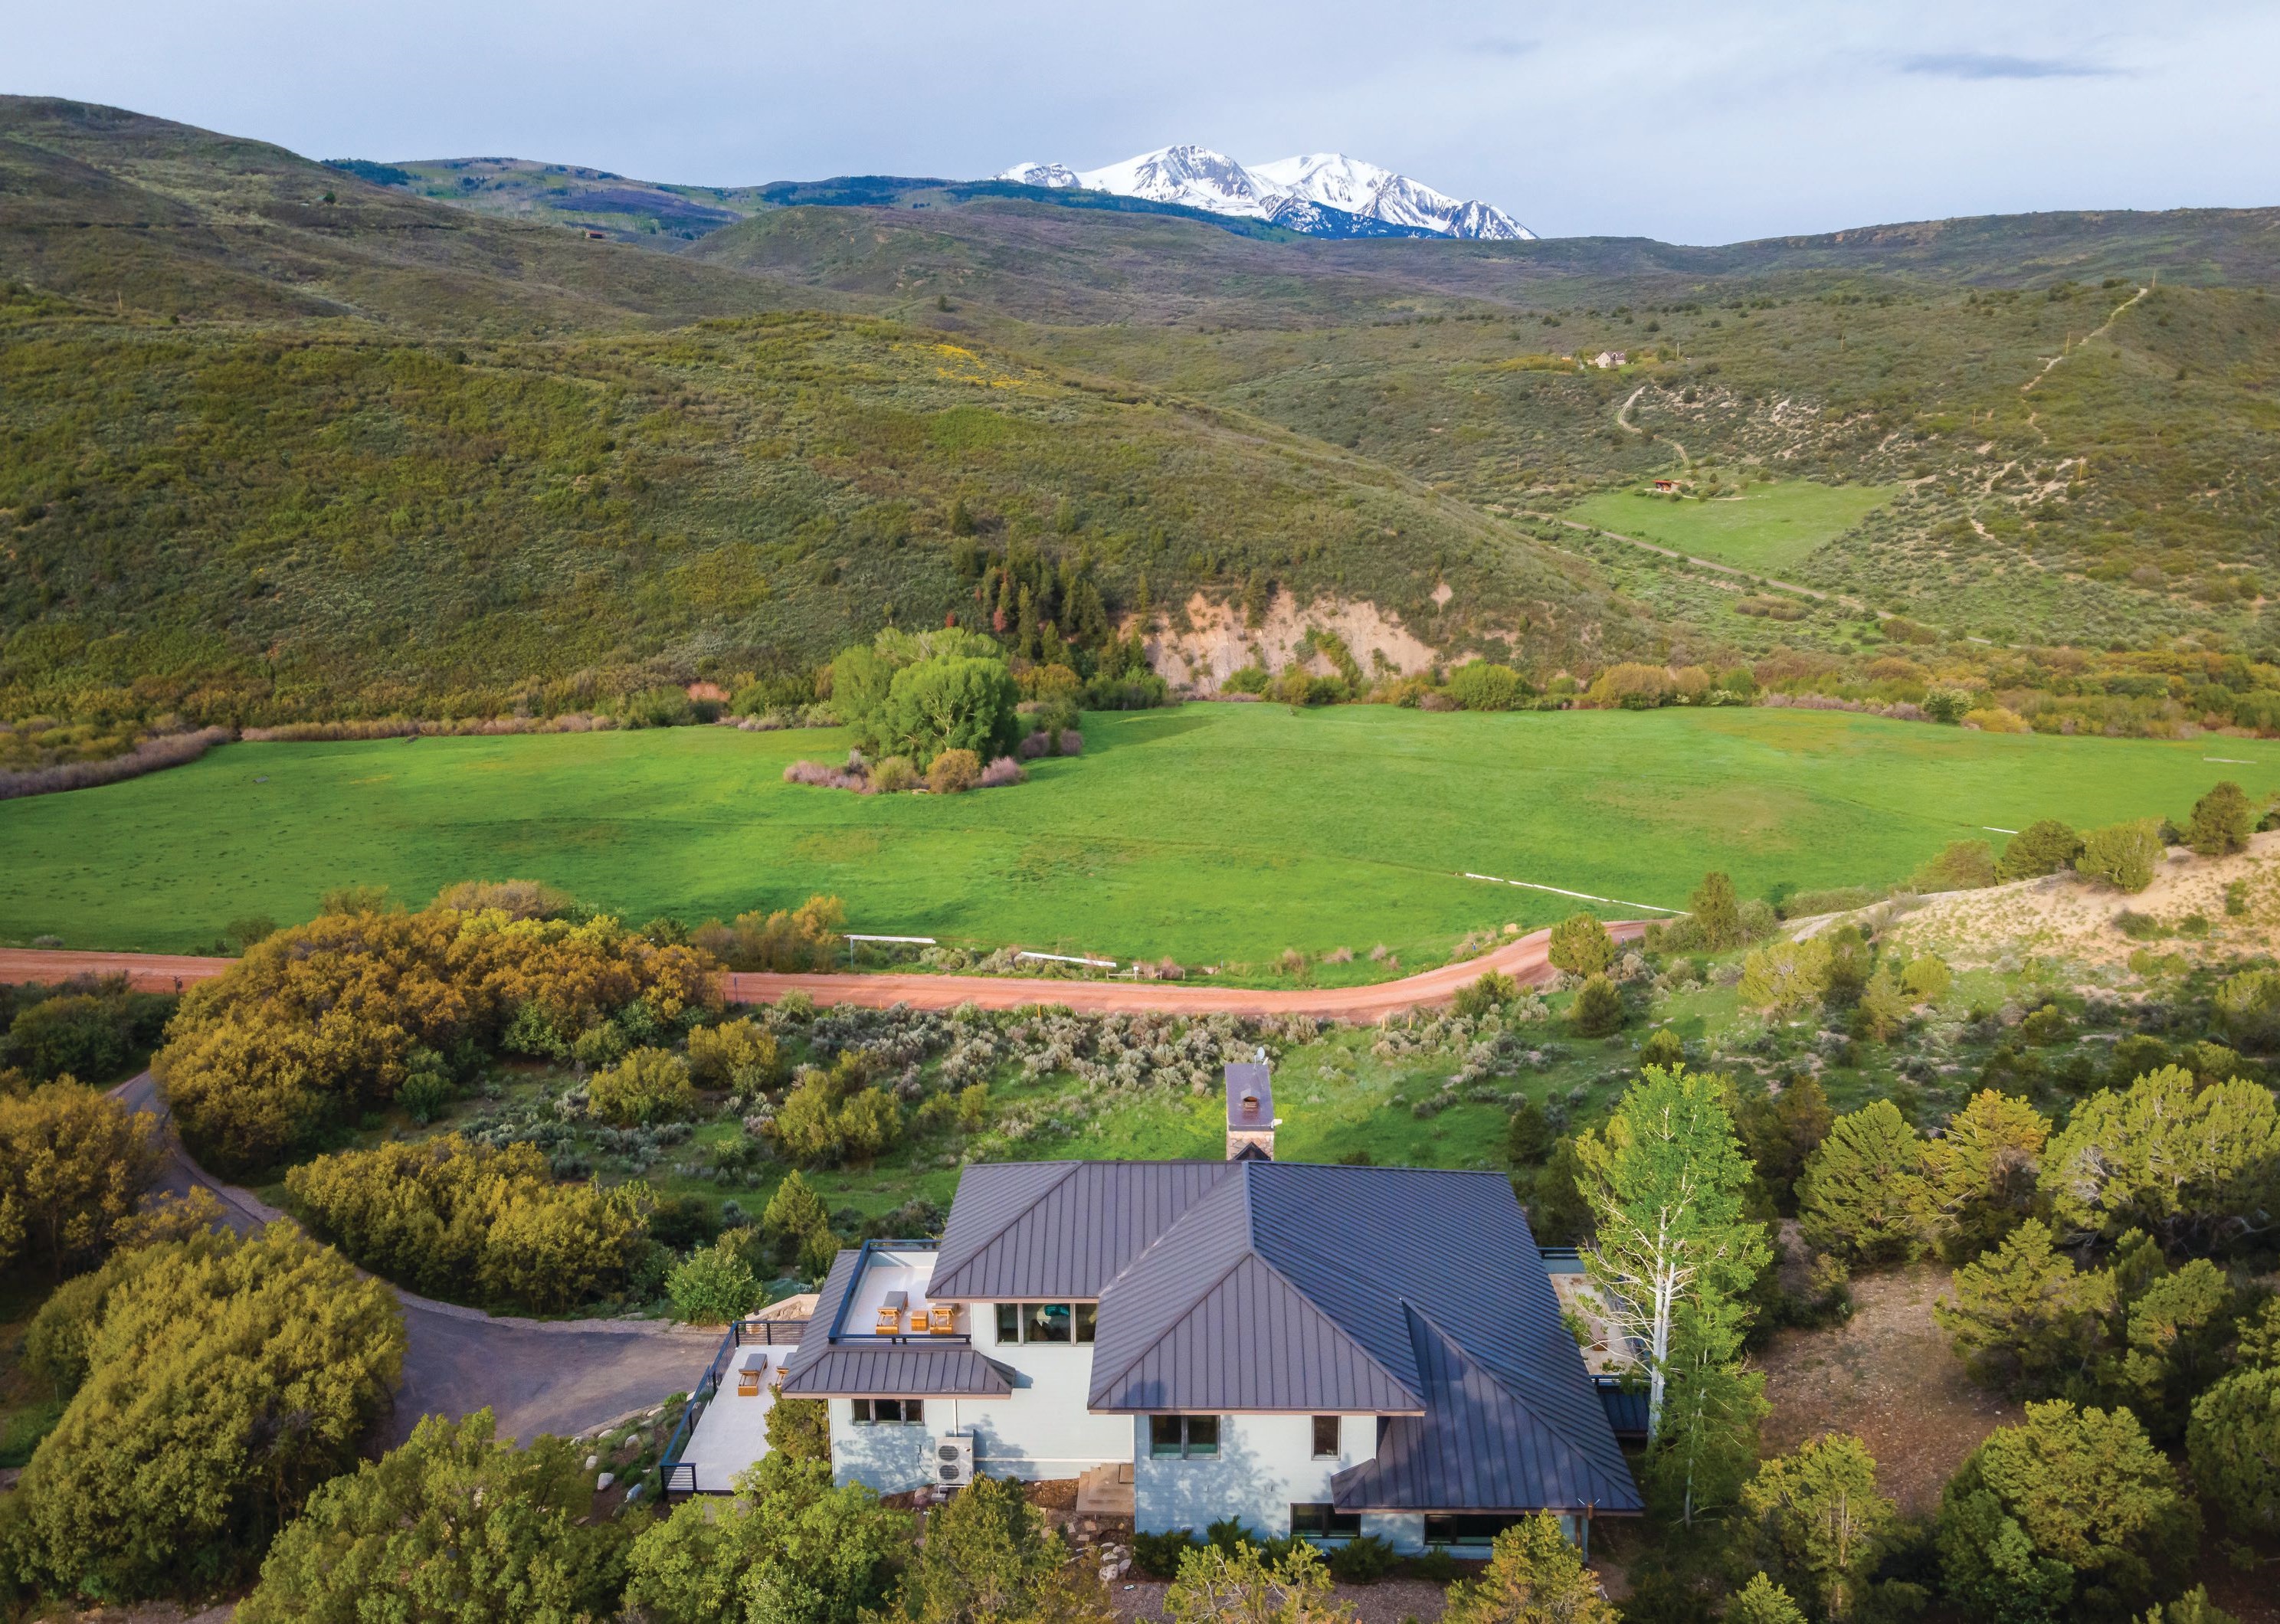 Featuring incredible views, the home is located in a peaceful valley. PHOTOGRAPHED BY SAM FERGUSON